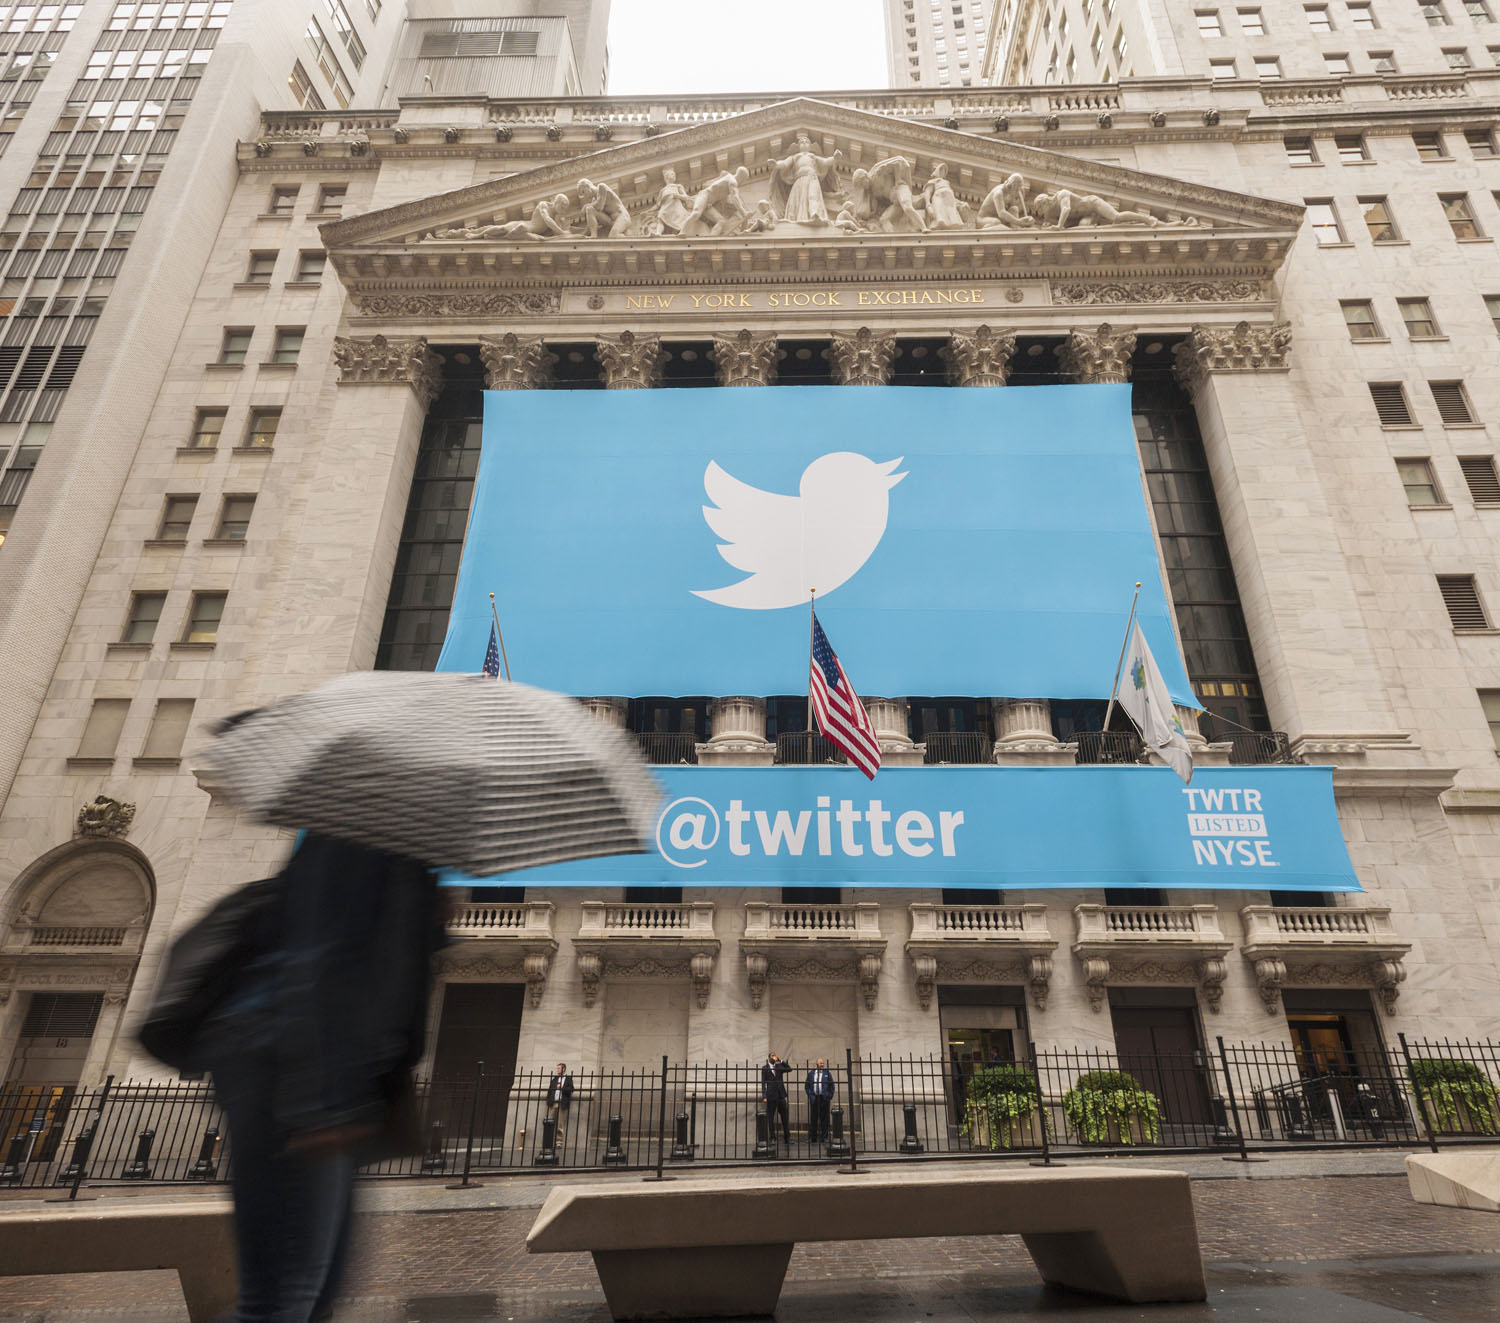 The New York Stock Exchange is decorated for Twitter's initial public offering (IPO) in Lower Manhattan in New York on Nov.7, 2013. (Richard Levine&mdash;Demotix/Corbis)